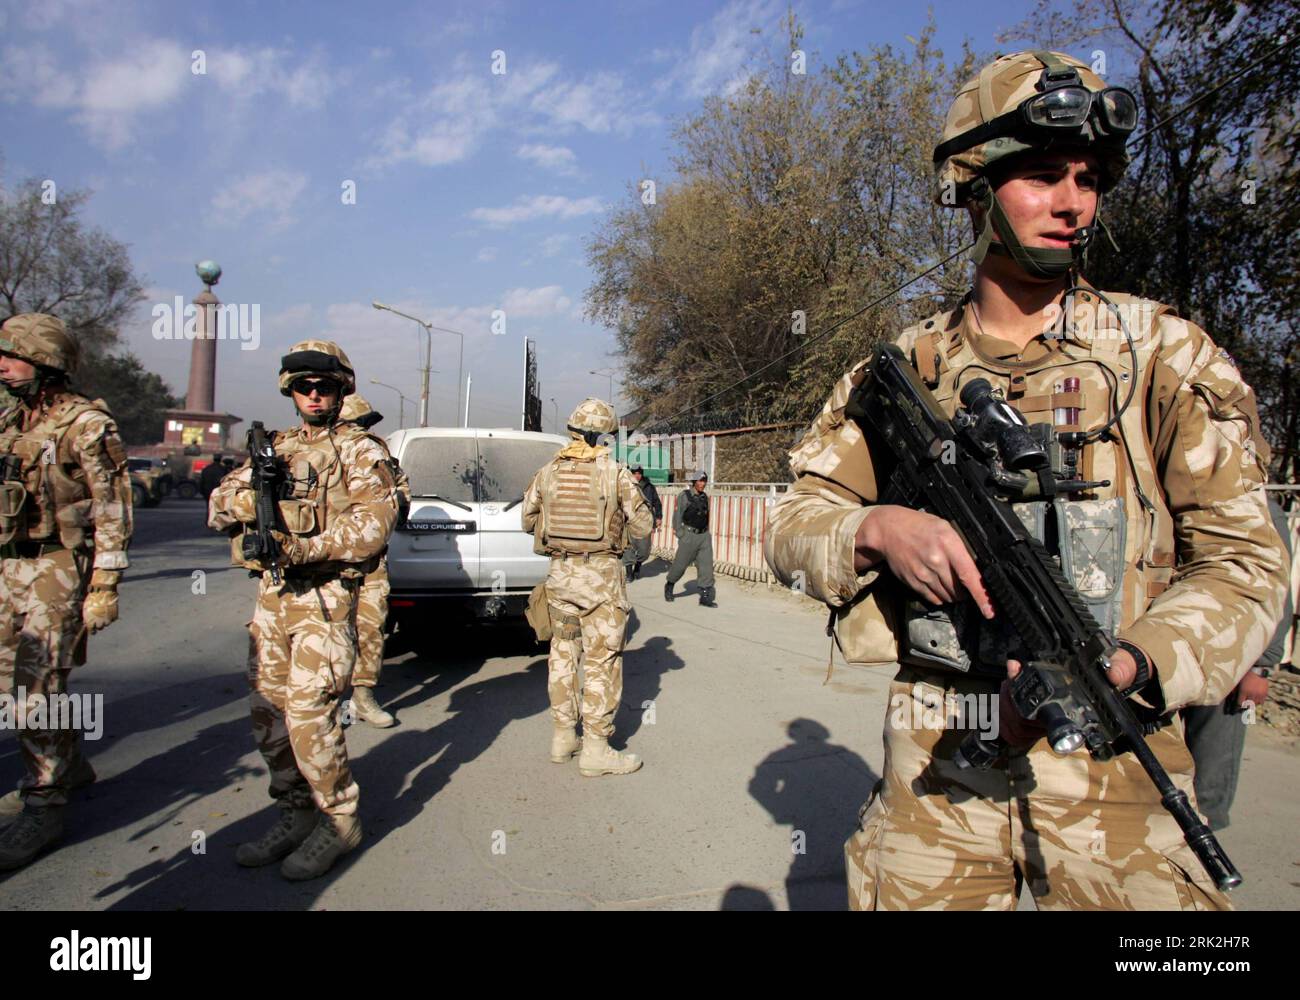 Bildnummer: 53194287  Datum: 12.07.2009  Copyright: imago/Xinhua (090712) -- KABUL, July 12, 2009 (Xinhua) -- In this undated file photo British soldiers stand on alert in Kabul, capital of Afghanistan. Four soldiers of the NATO-led International Security Assistance Force (ISAF) were killed as a result of improvised explosive device (IED) strikes from insurgents that occurred on July 11 in southern Afghanistan, a press release of the alliance said Sunday. (Xinhua/Zabi Tamanna) (zj) AFGHANISTAN-KABUL-NATO-CASUALTIES  PUBLICATIONxNOTxINxCHN  Militär ISAF kbdig xcb  2009 quer  premiumd Soldat Asi Stock Photo